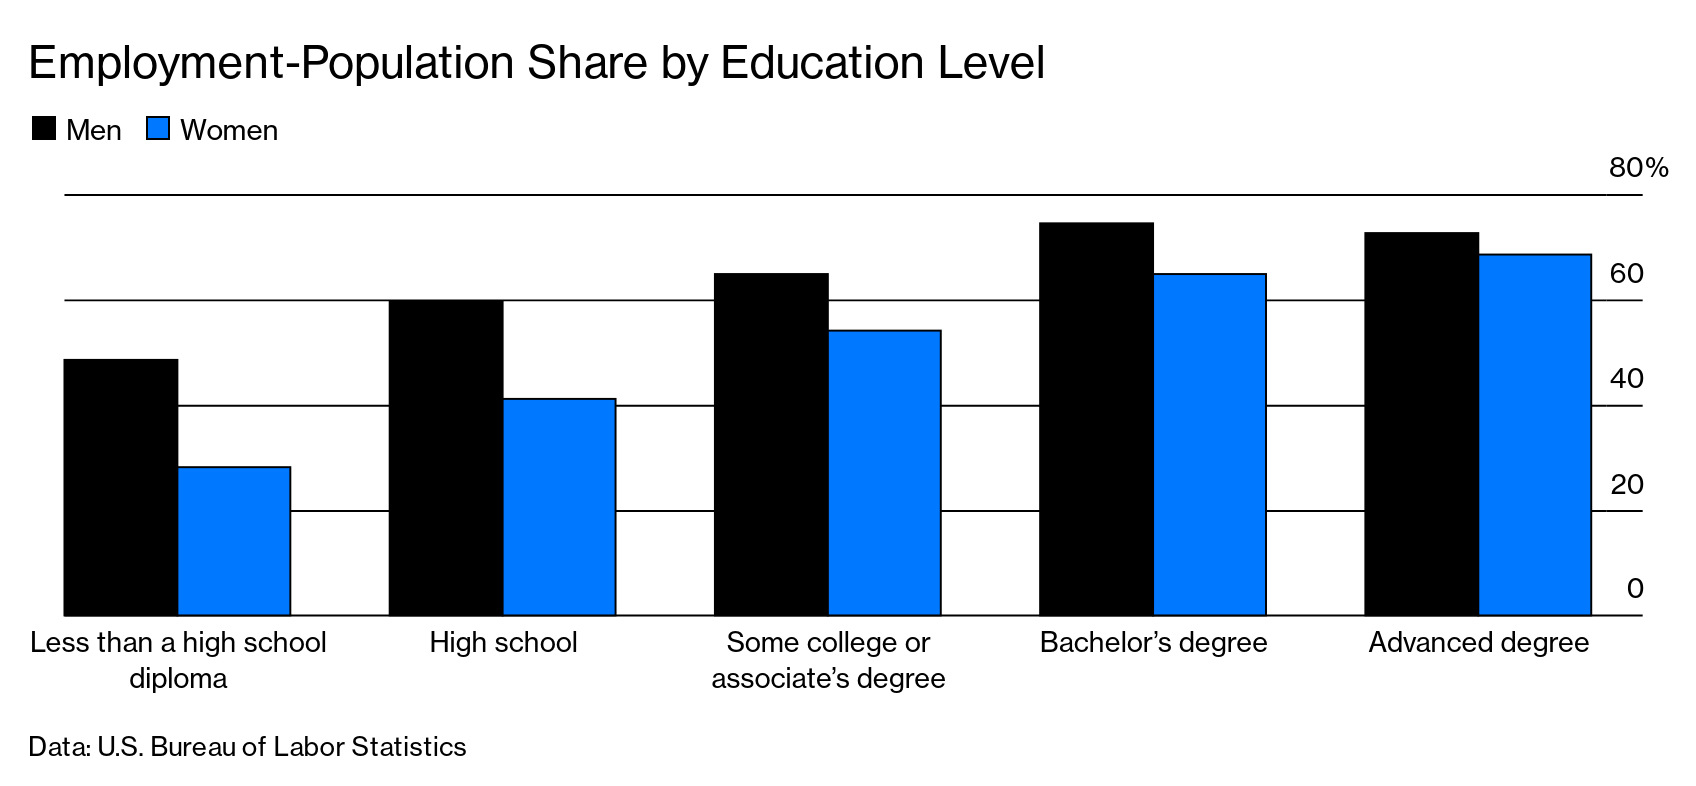 Degrees More Advanced Than Bachelor of Arts Don't Always Mean More Jobs for  Men - Bloomberg